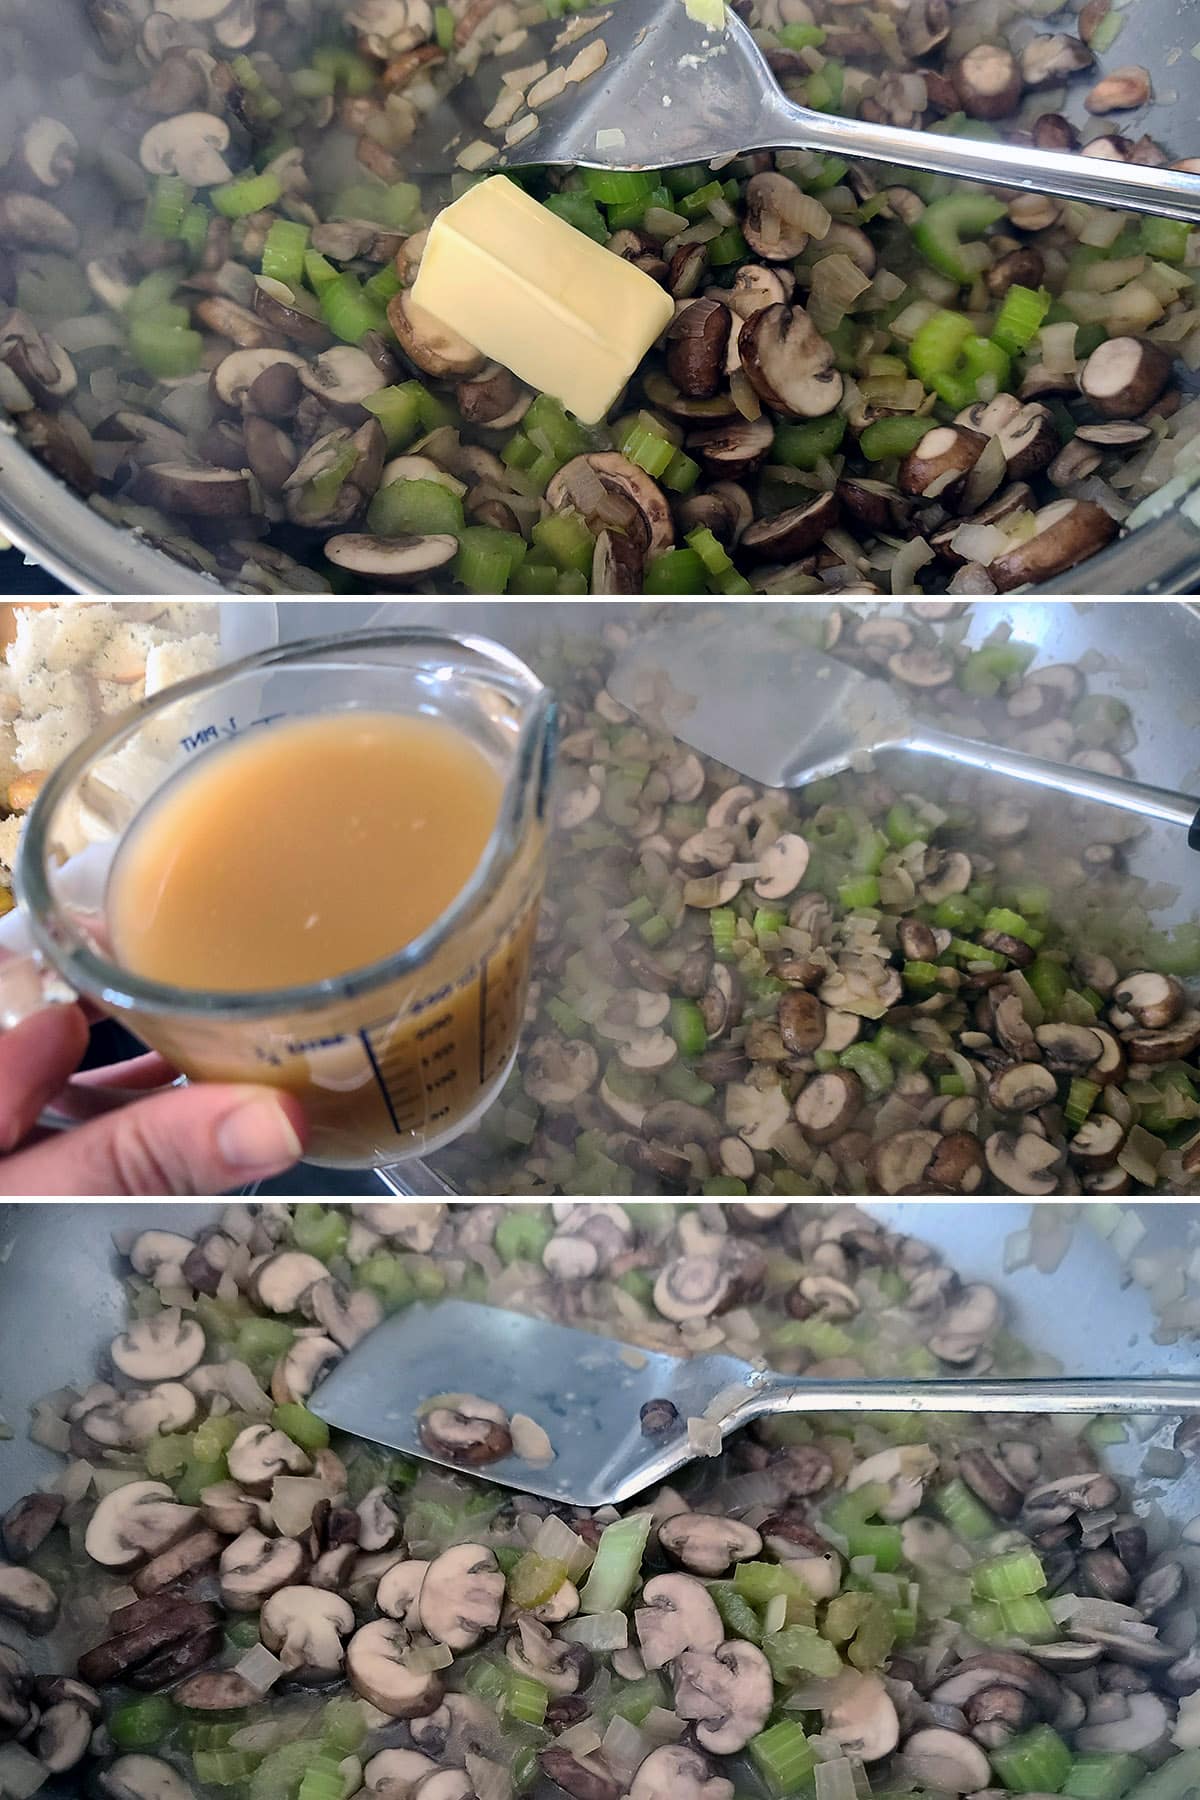 A 3 part image showing butter and broth being added to the pan of chopped veggies and combined.